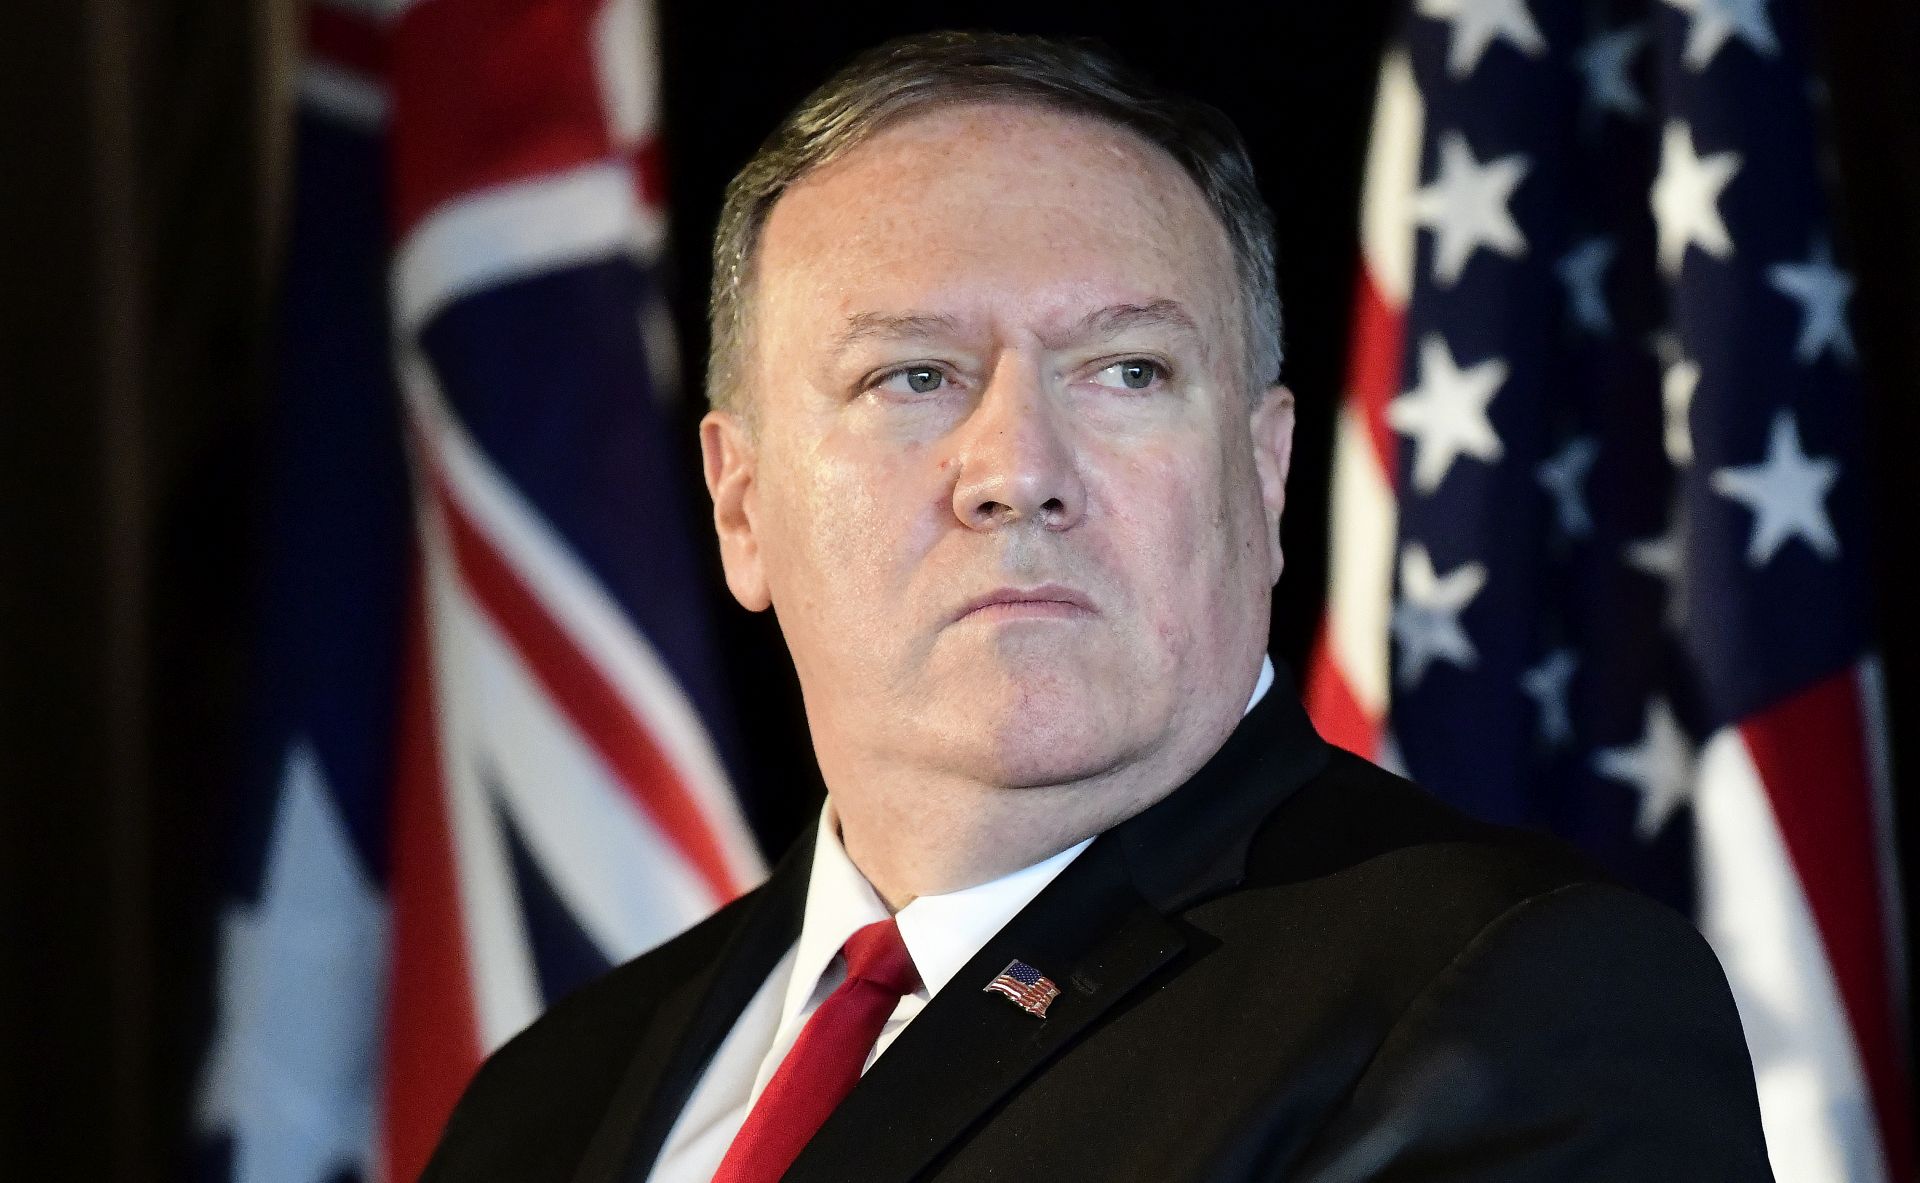 epa07755942 US Secretary of State Mike Pompeo during a joint media conference for the Australia-United States Ministerial Consultations (AUSMIN) at State Parliament, in Sydney, New South Wales, Australia, 04 August 2019.  EPA/BIANCA DE MARCHI  AUSTRALIA AND NEW ZEALAND OUT